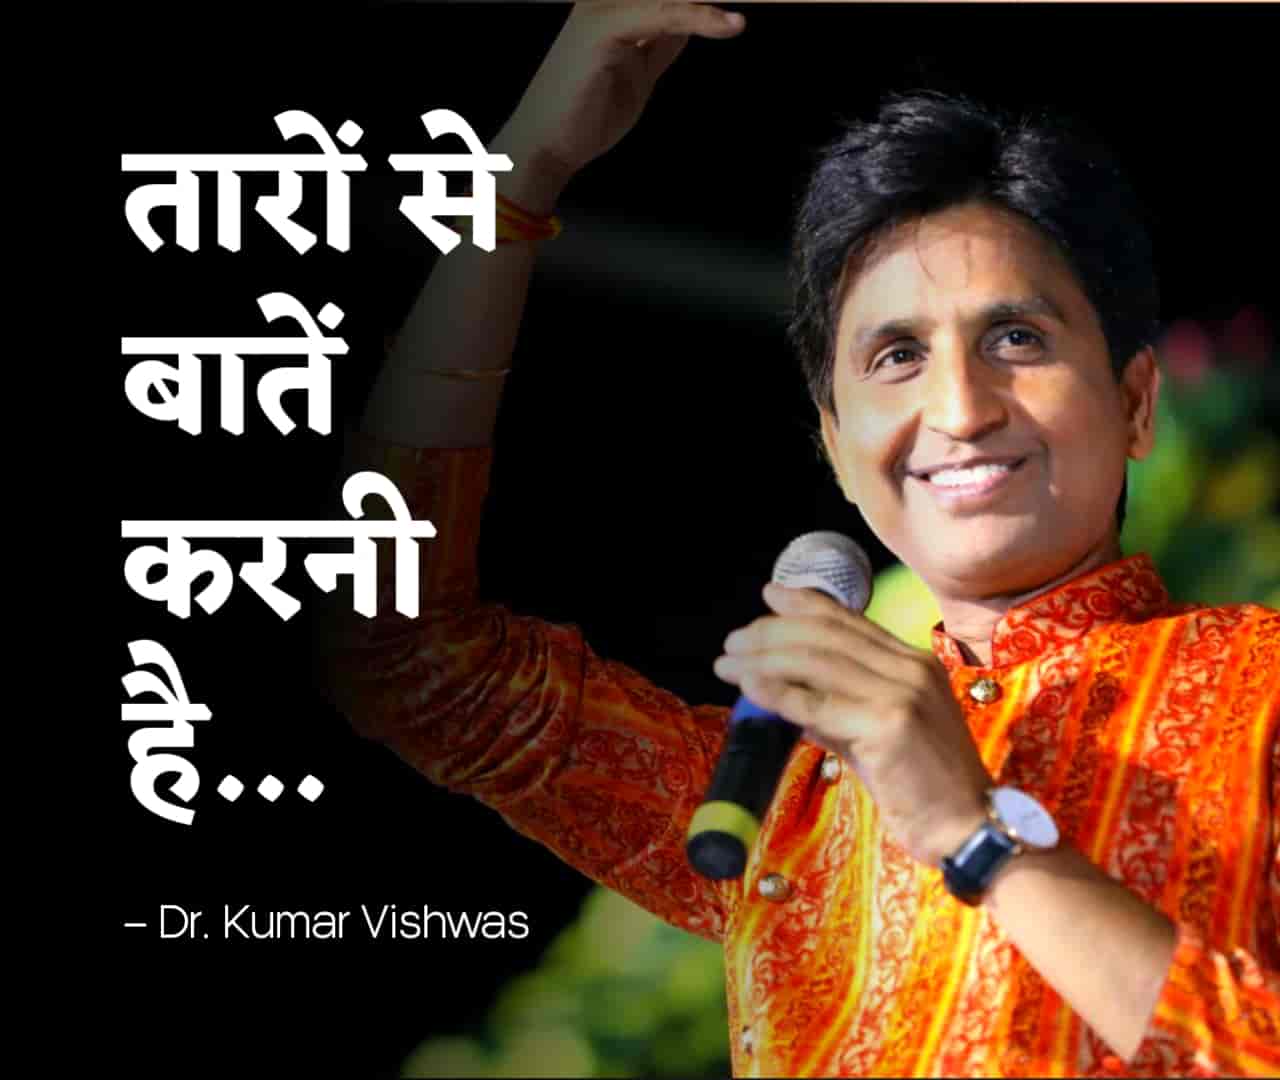 This very beautiful poetry by Kumar Vishwas which is based on increasing pollution. A beautiful poetry, presented by Kumar Vishwas in a program at ABV News Kavi Sammelan, while taking a dig at the rising pollution.